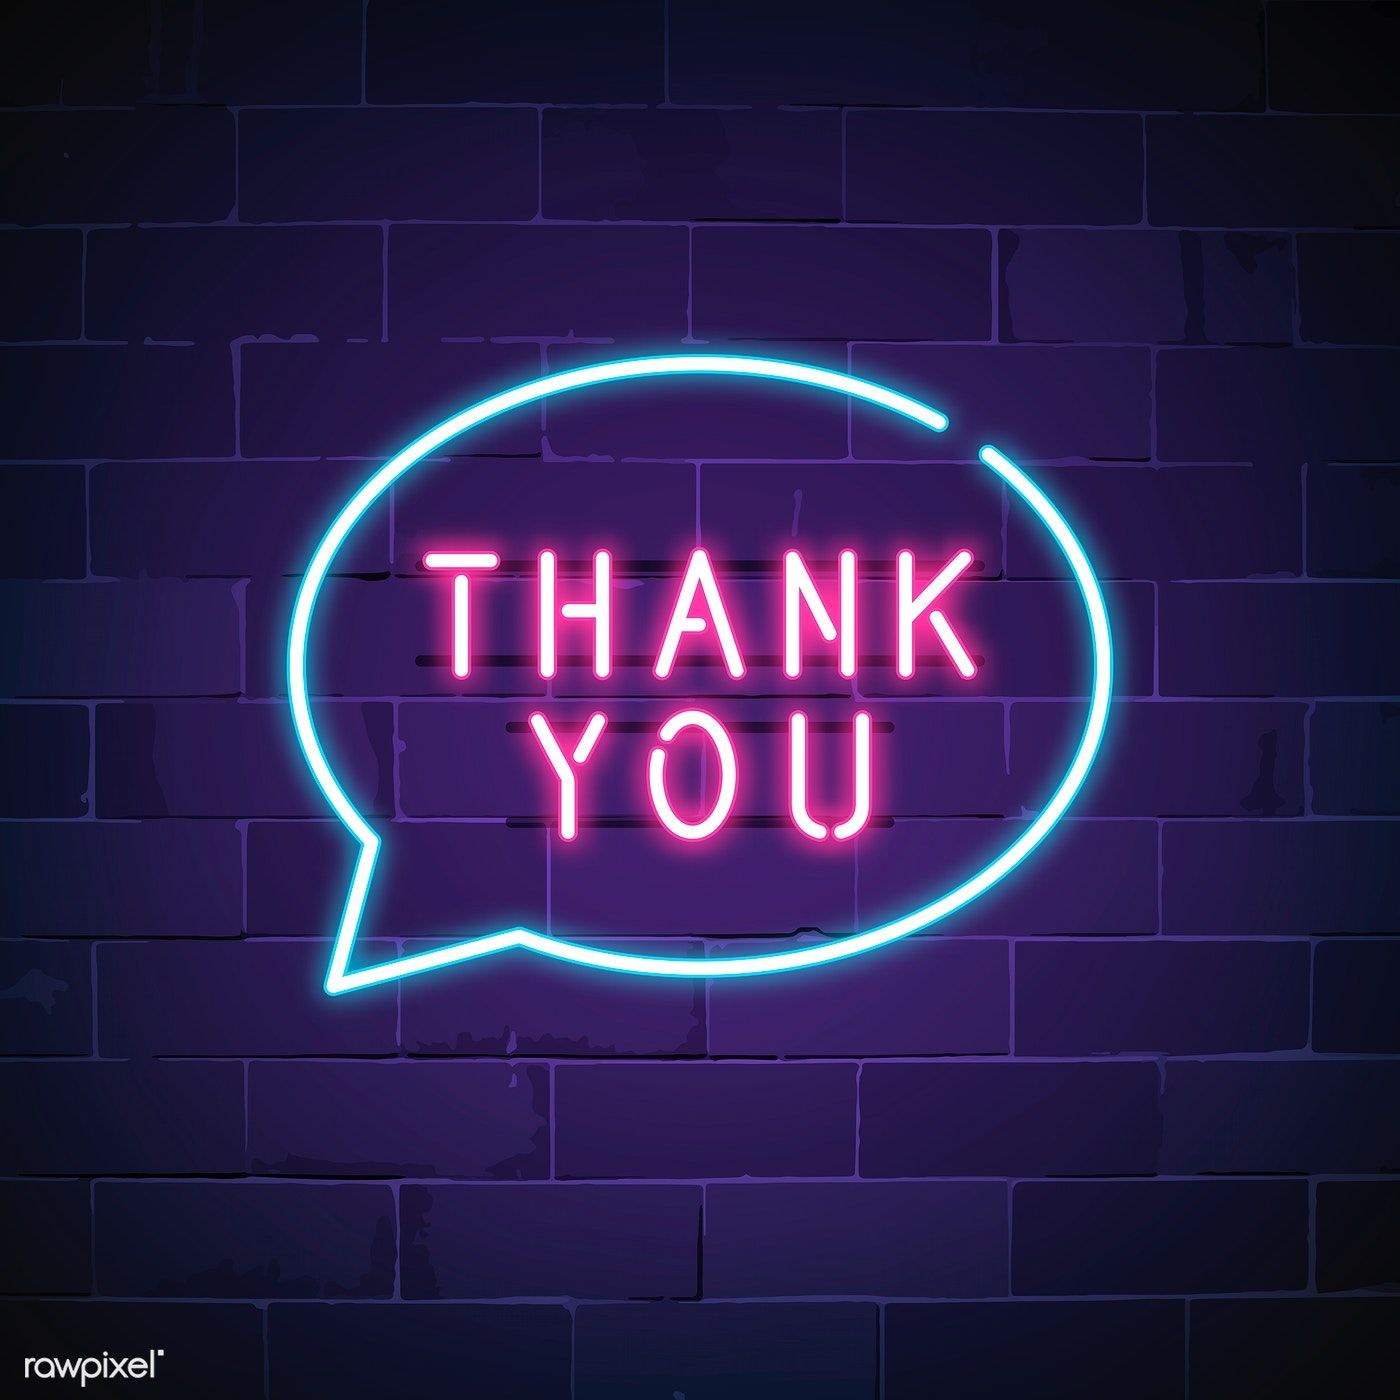 Download premium vector of Thank you neon sign vector 537680. Neon signs, Neon words, Neon wallpaper